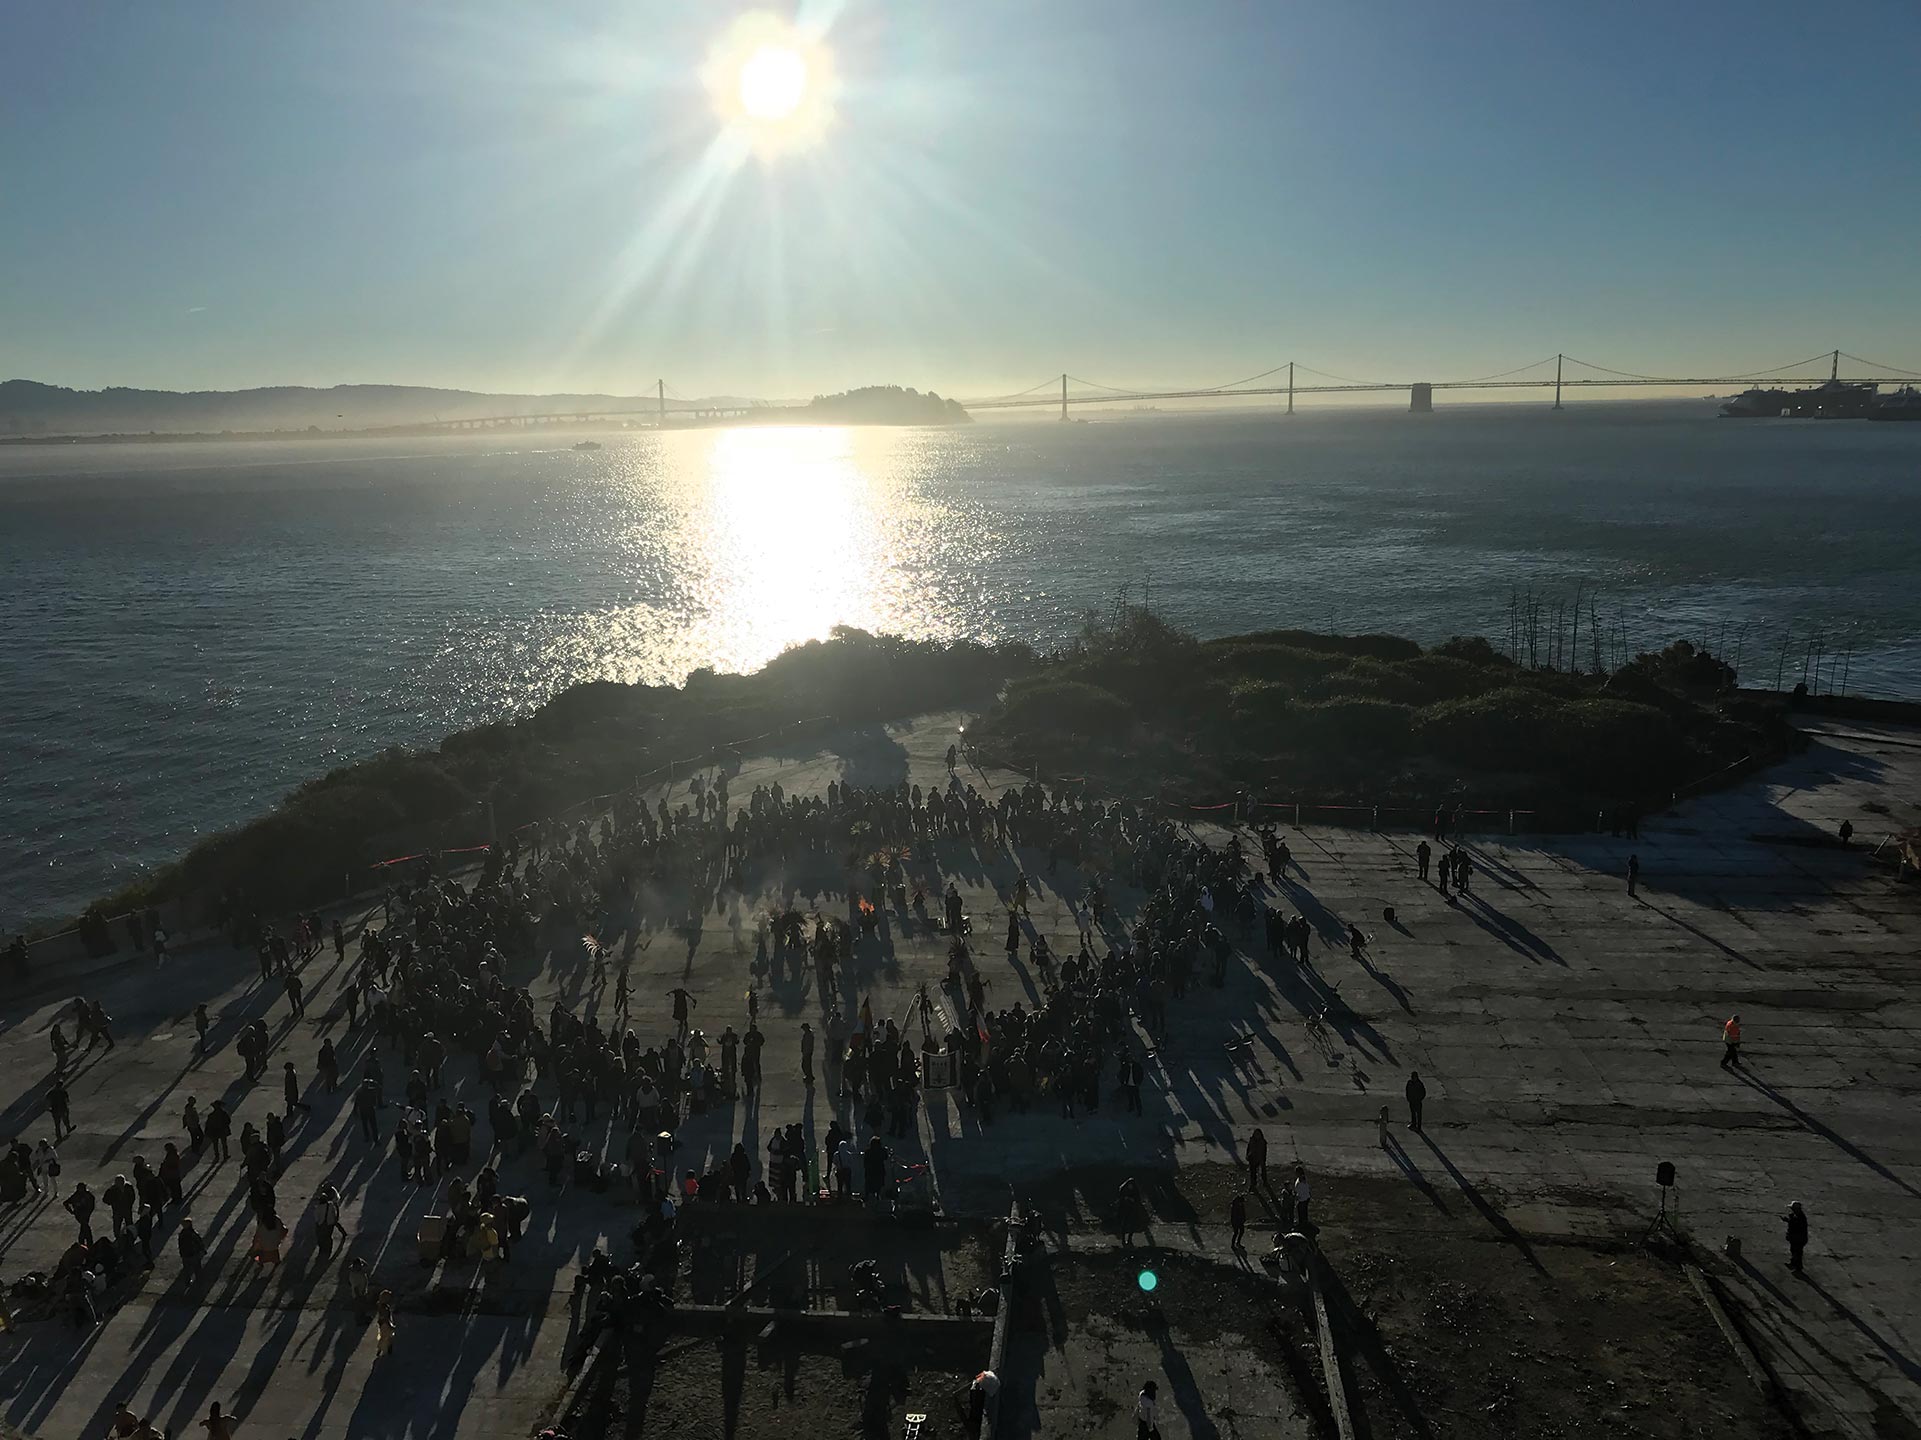 Arial view of event at Alcatraz